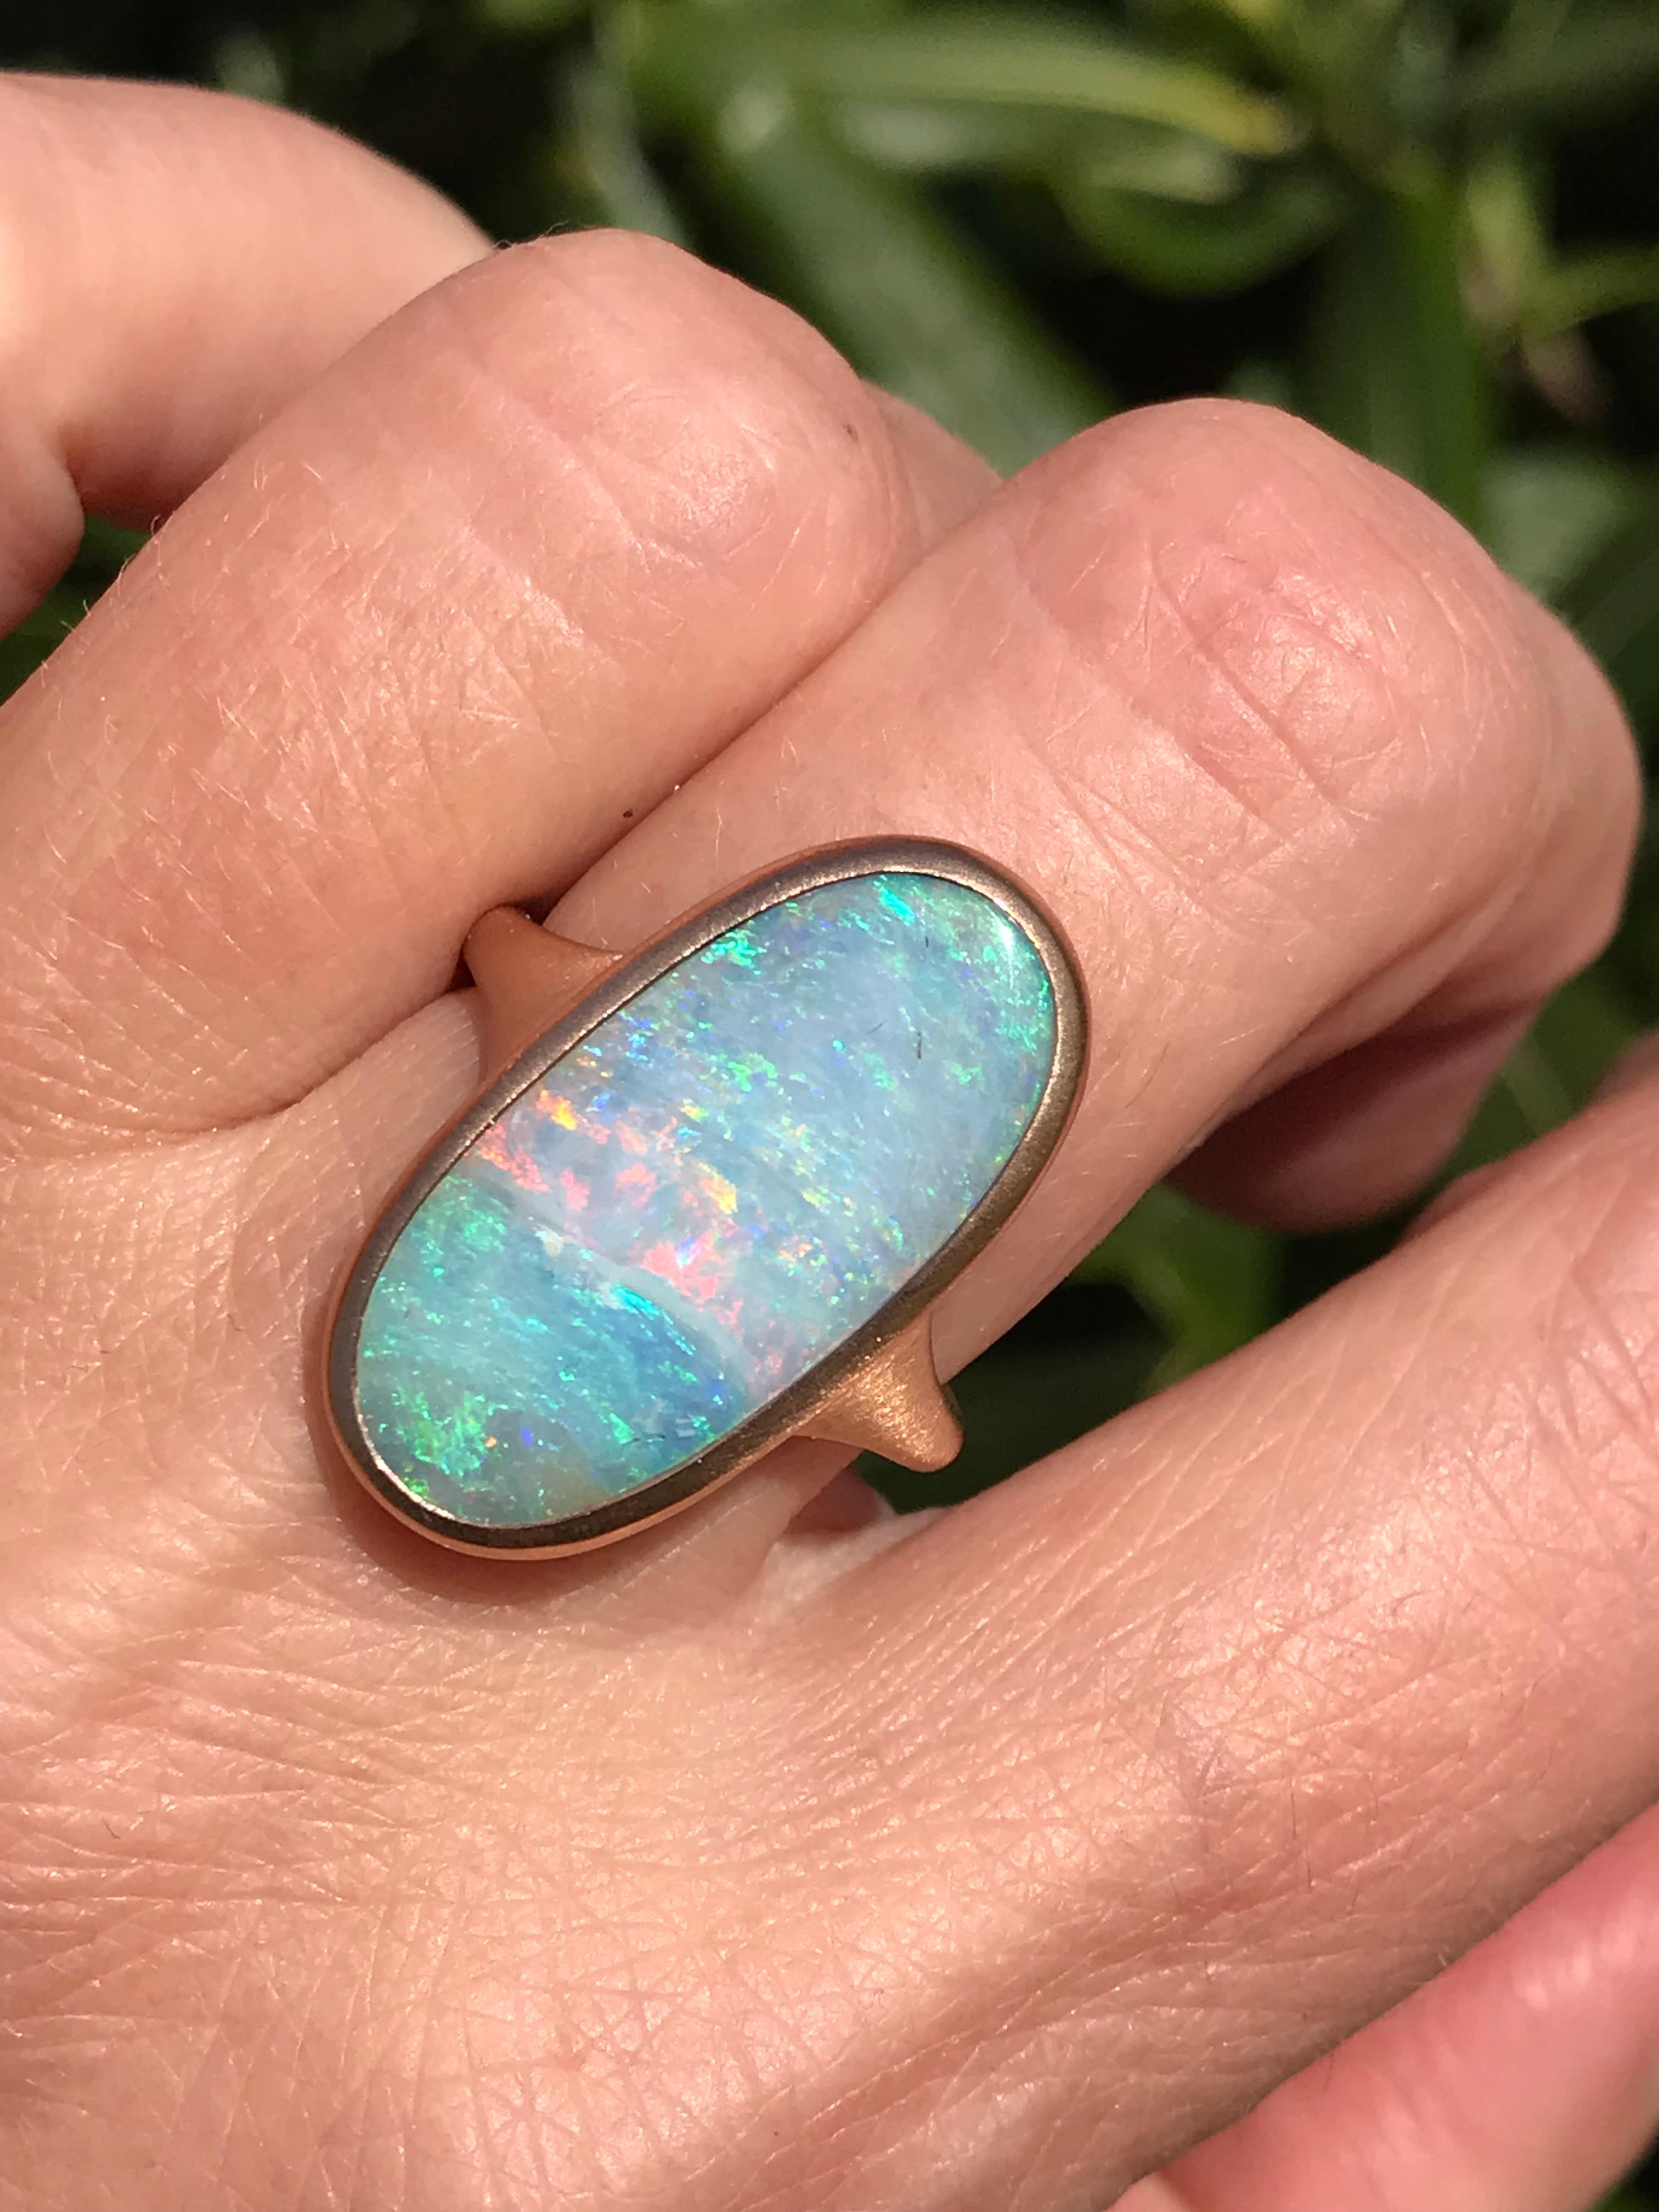 Dalben design One of a kind 18 kt rose  gold ring with an oval cabochon solid Australian Boulder Opal weight 18,34 carats  .
Ring size  US 7    -  EU 54 1/2 re-sizable .  
Bezels setting dimension:  
max width 12,9 mm,  
max height 24 mm. 
The ring